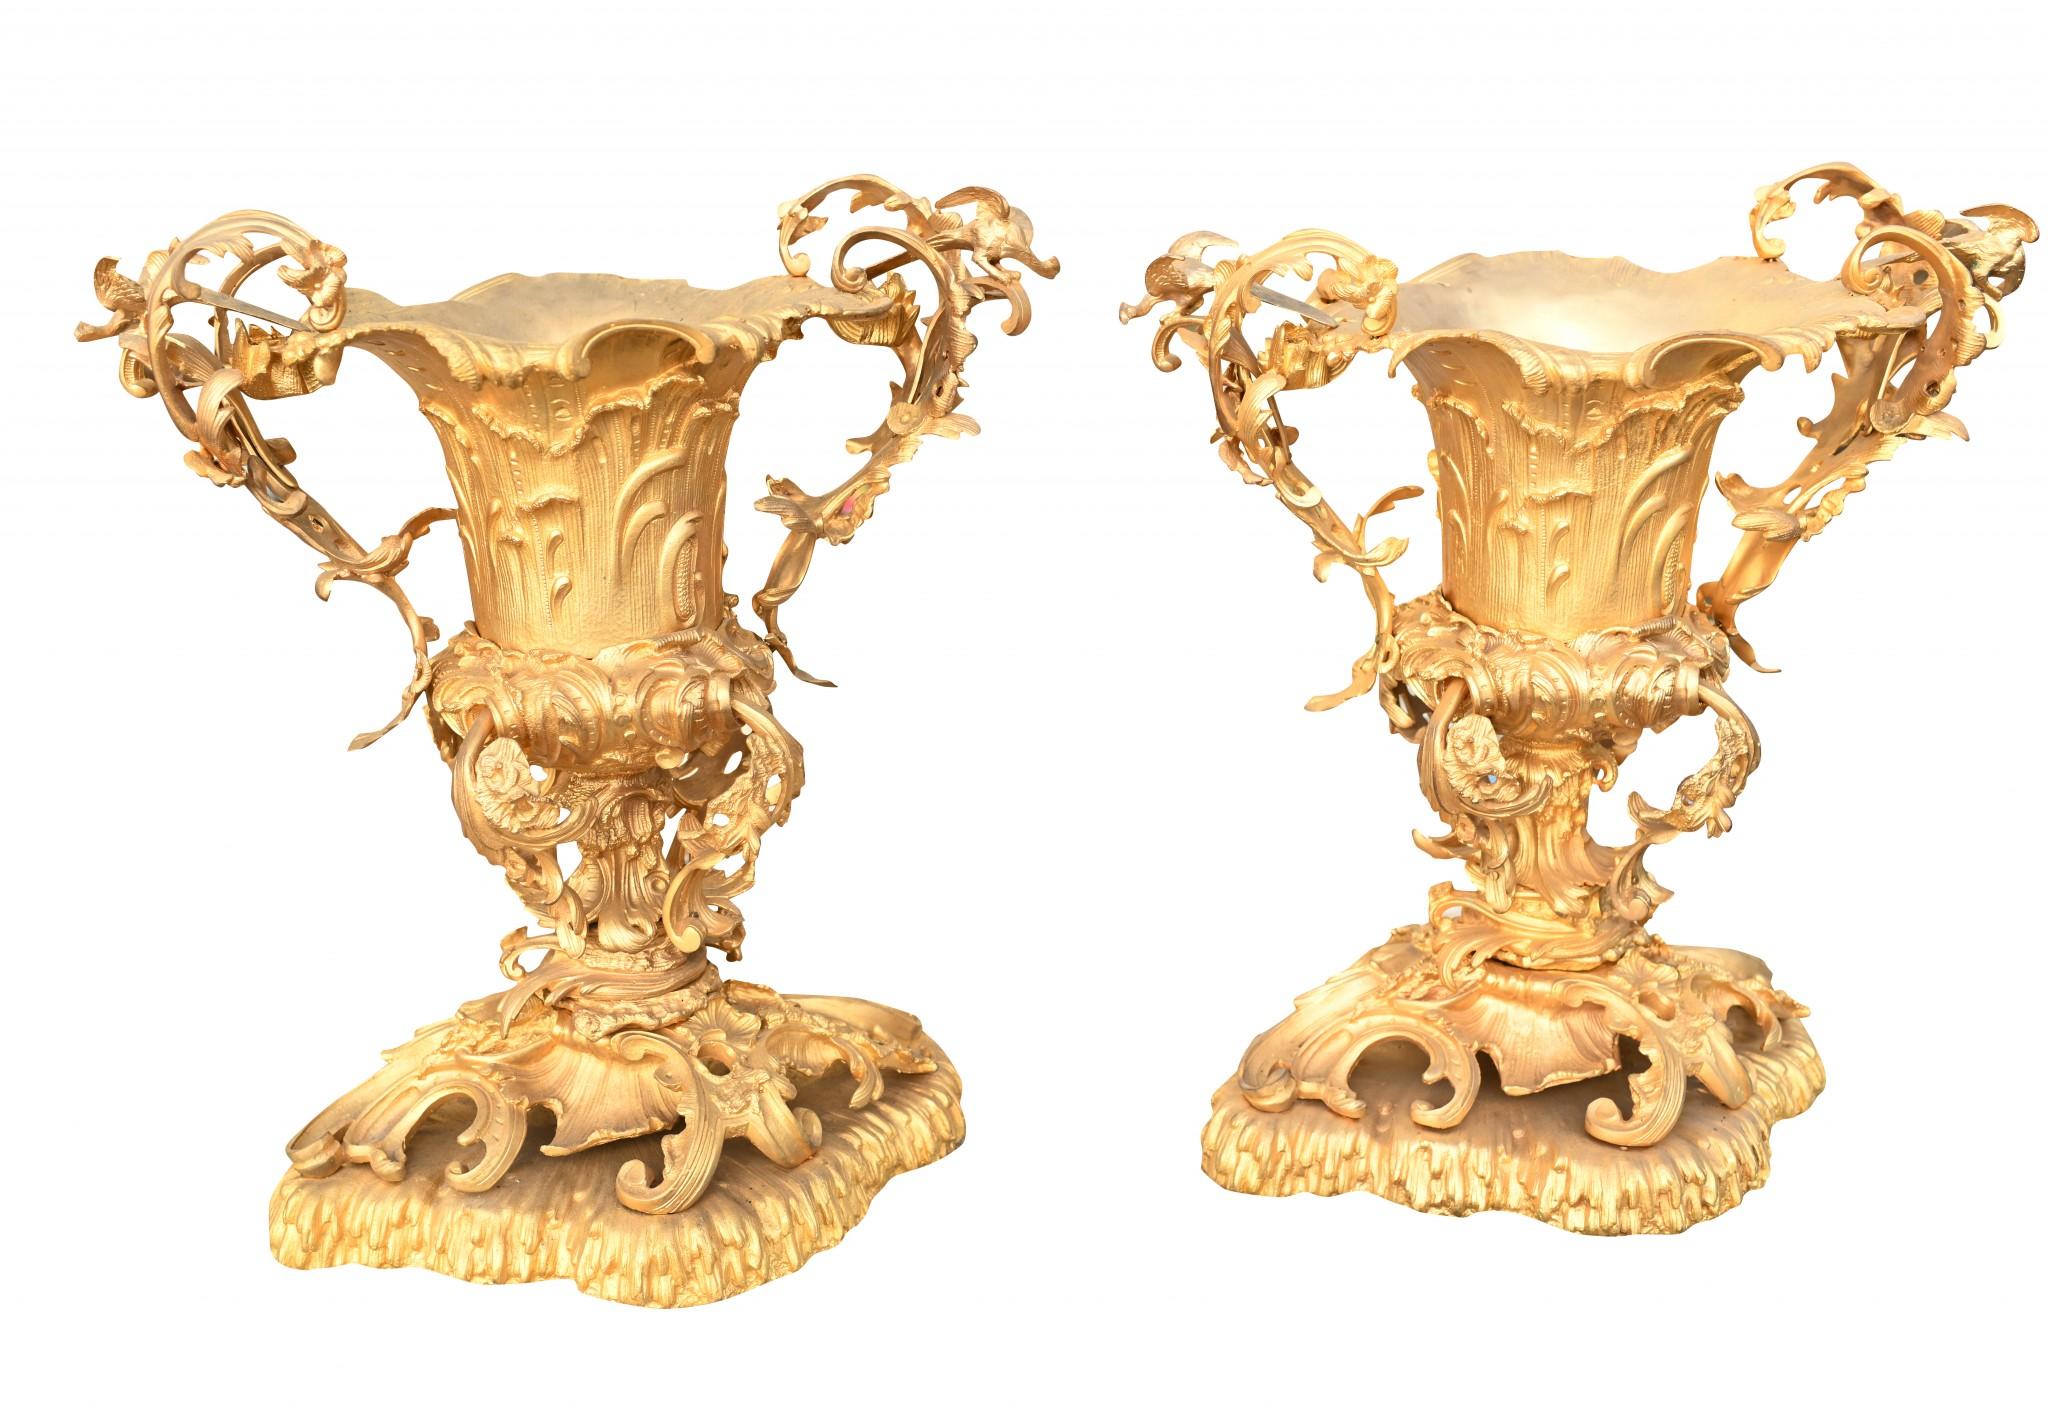 Pair French gilt rococo urns in the Louis XVI manner
Very opulent pair, just crying out to be the centrepiece to any interiors scheme
So intricately cast with the rocaille details
Very visceral piece with all the rococo swirls and curves
Bought from